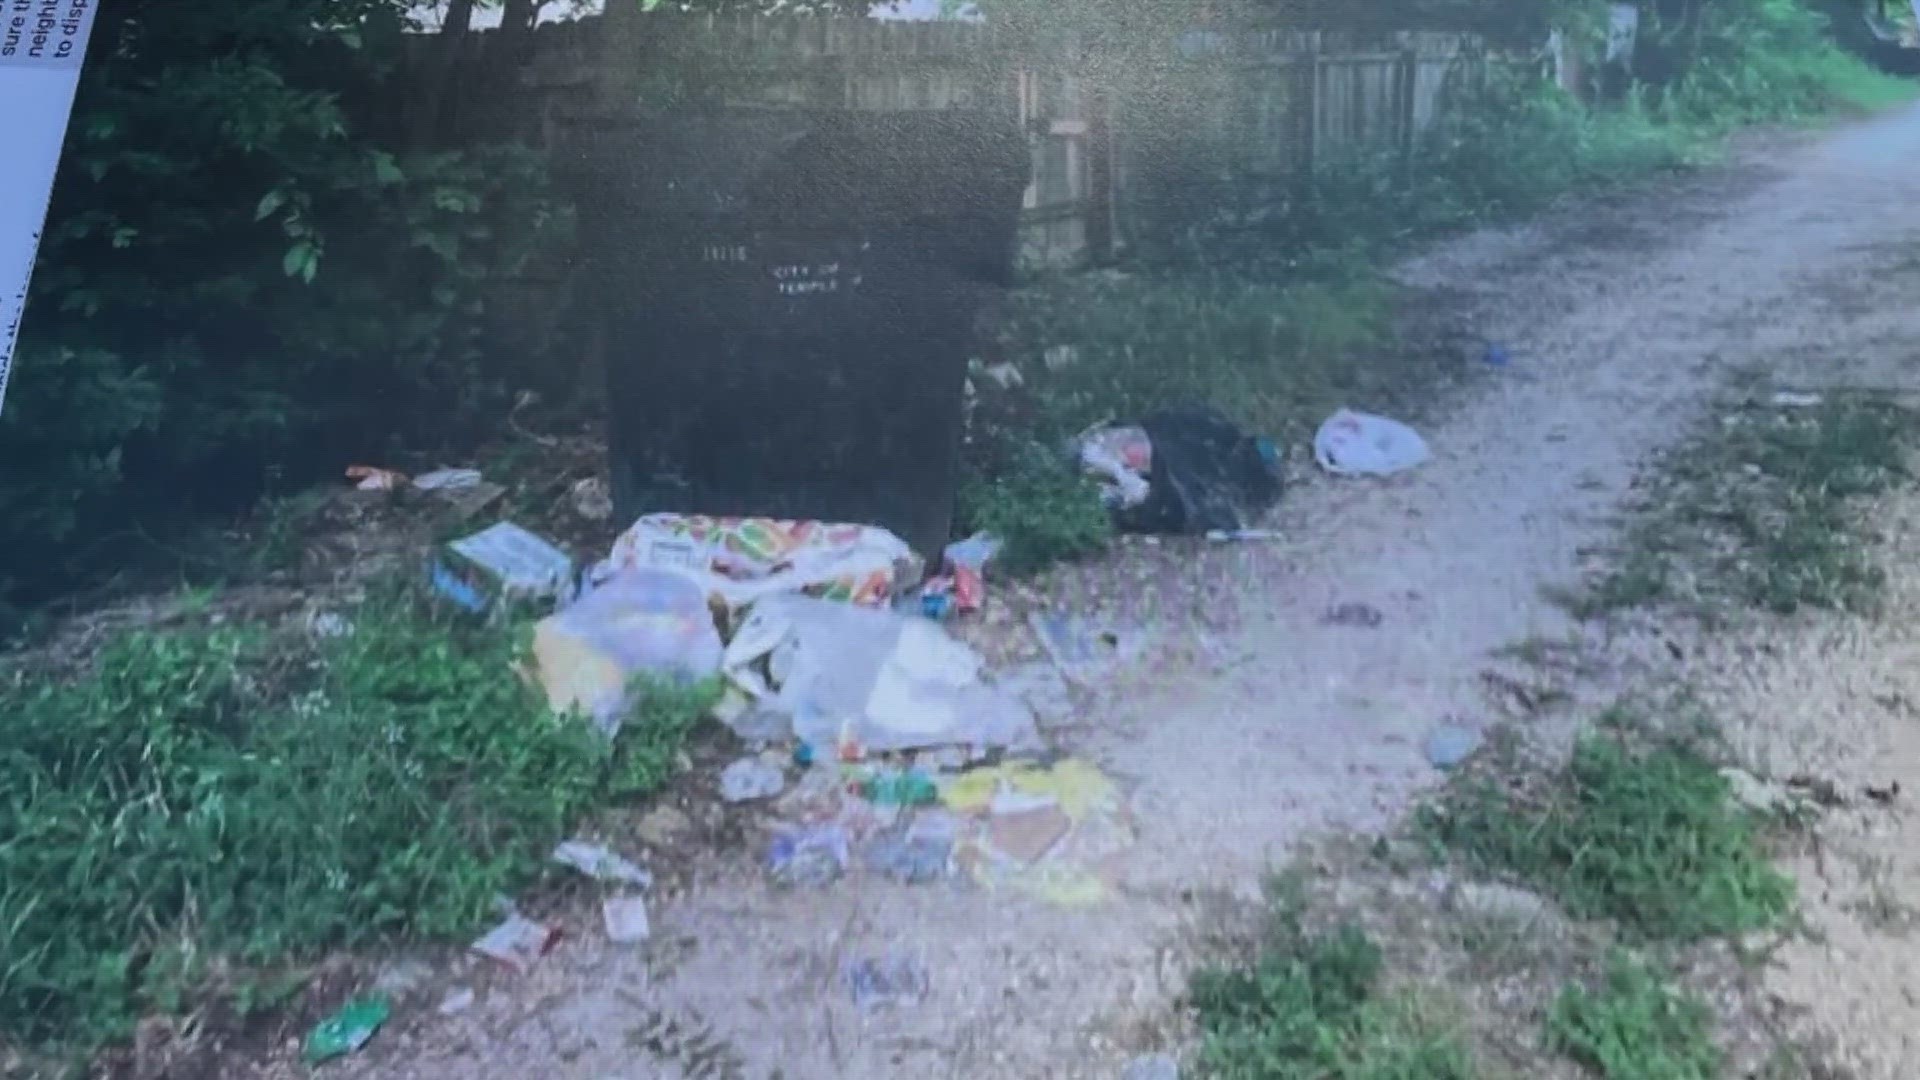 David Rowe said he's dealt with trash piling up in his alley behind his home for years.